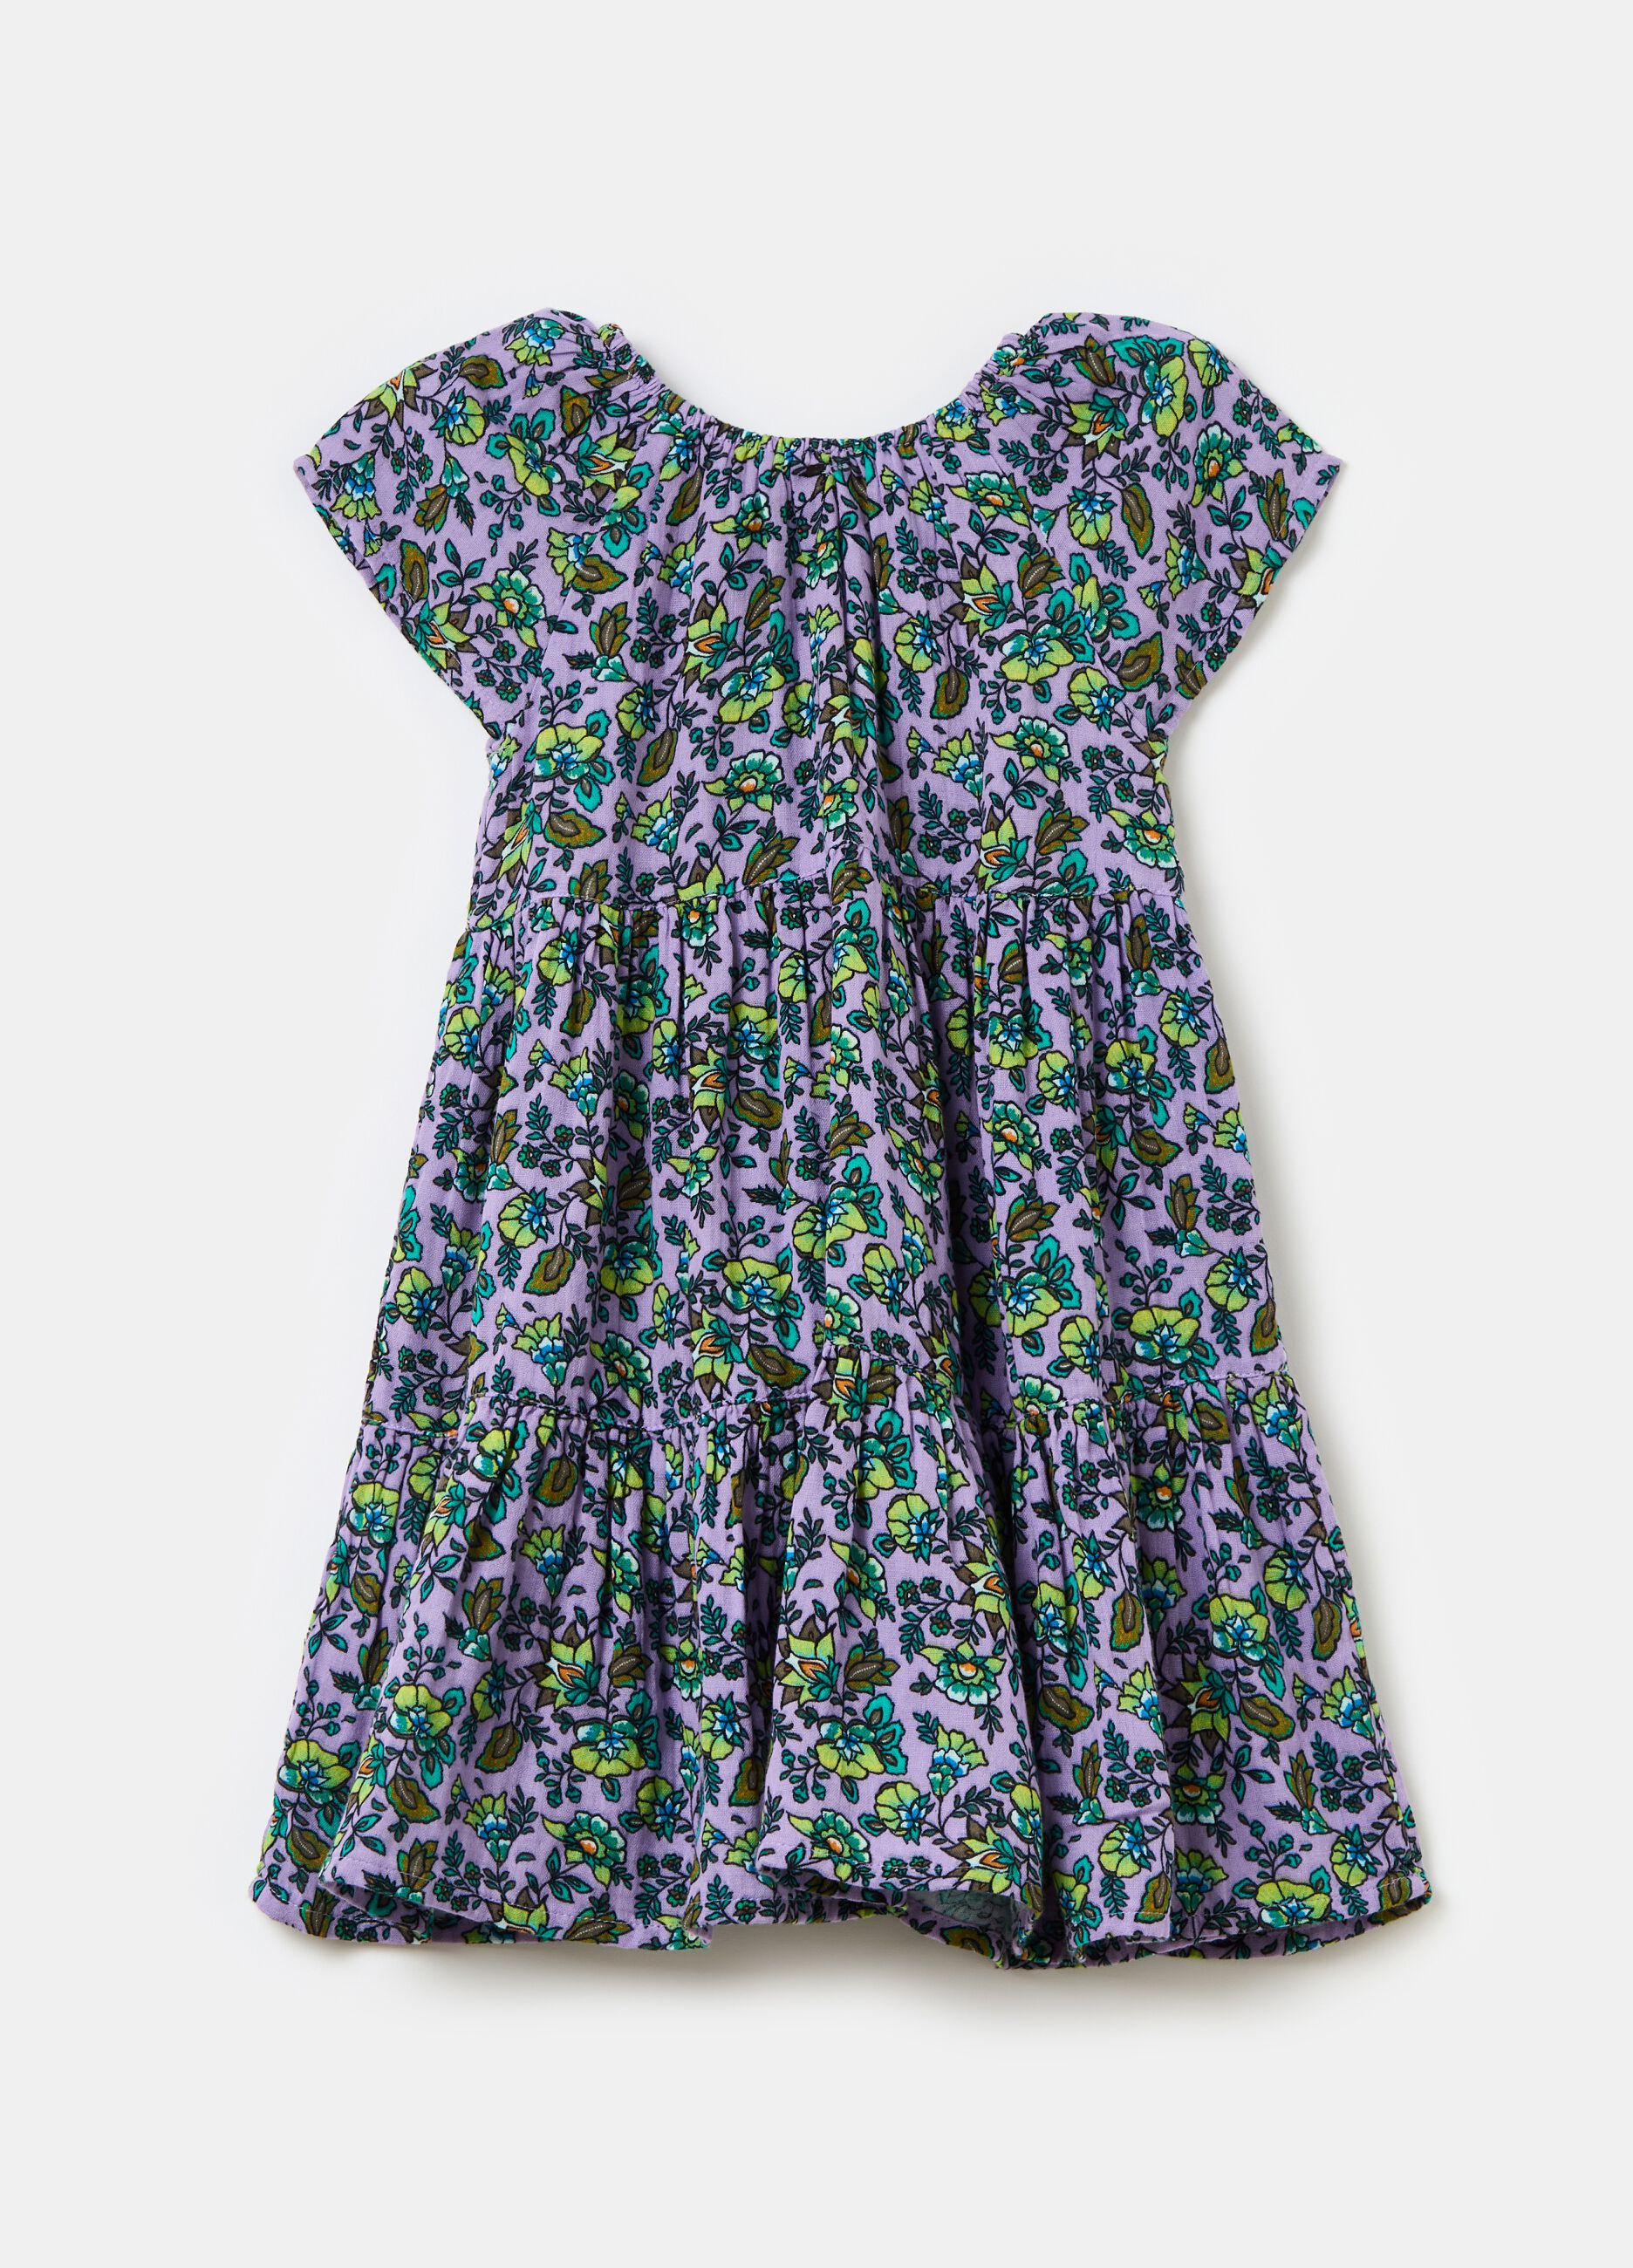 Cotton dress with floral pattern